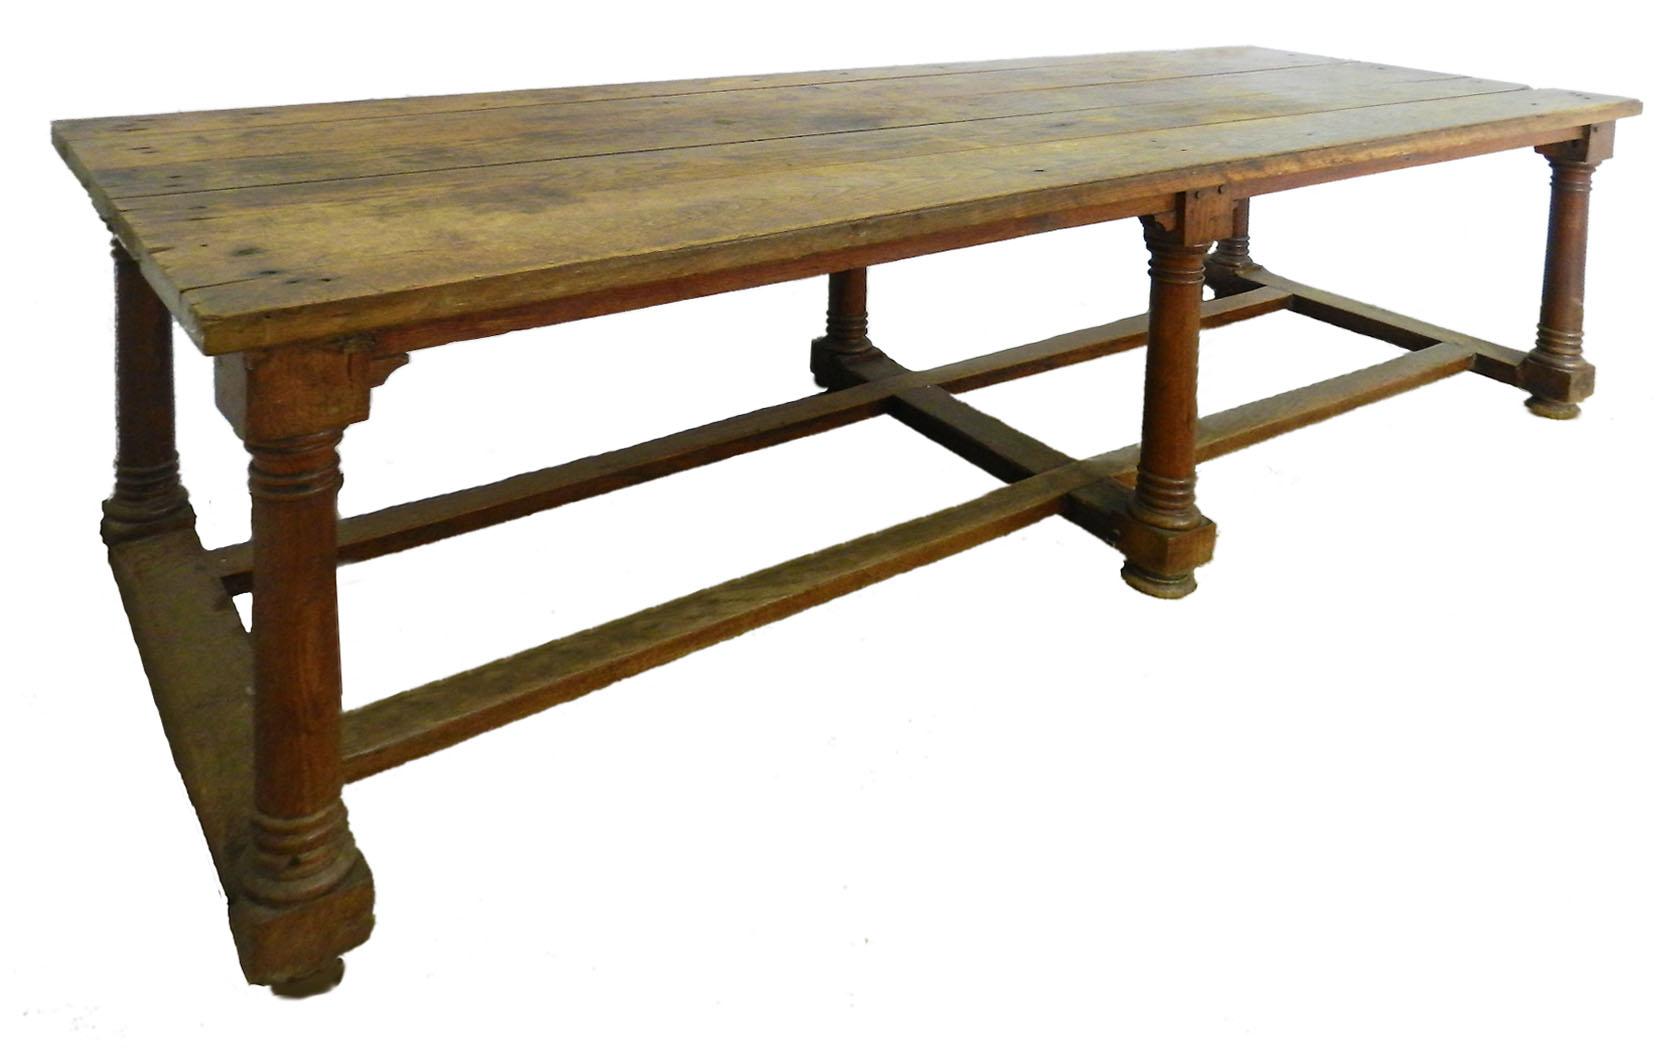 French refectory table late 18th century French Provincial oak
French Country House Server, dining table
This refectory dining table (reminiscent of French Drapers Tables) this came from a French Chateau in the South of France where it had been